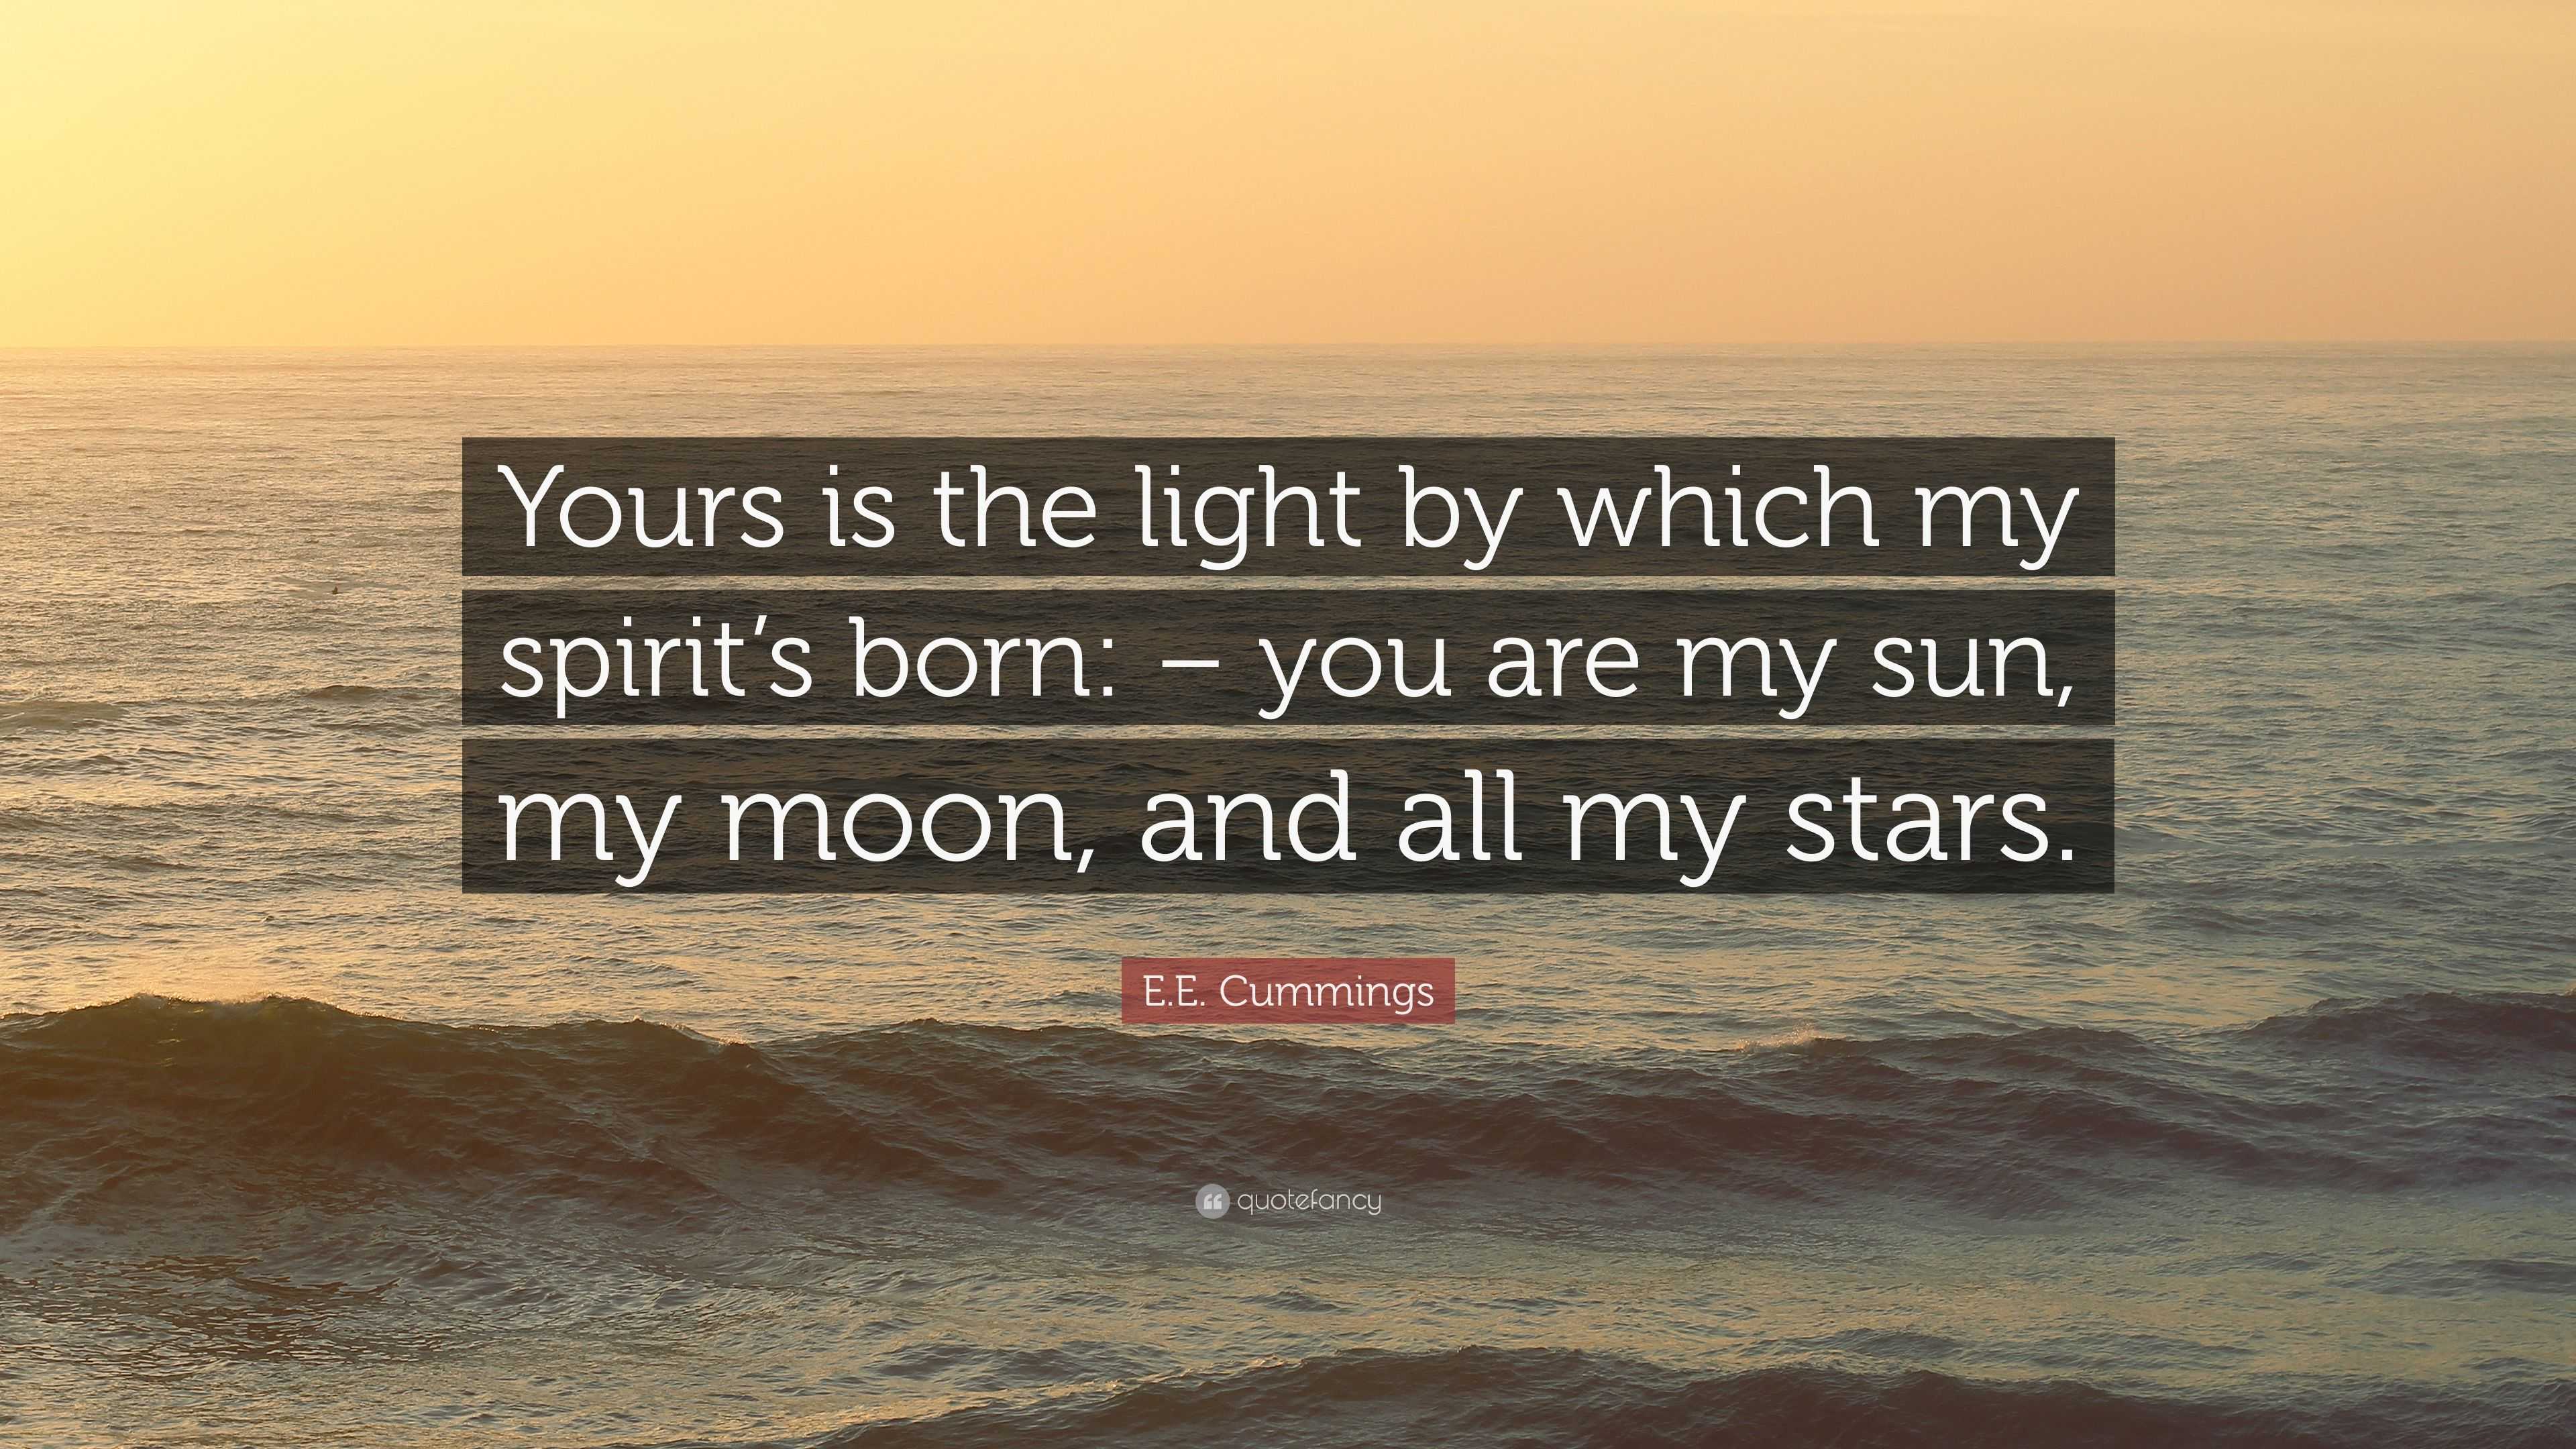 E.E. Cummings Quote: “Yours is the light by which my spirit’s born: – you are my ...3840 x 2160